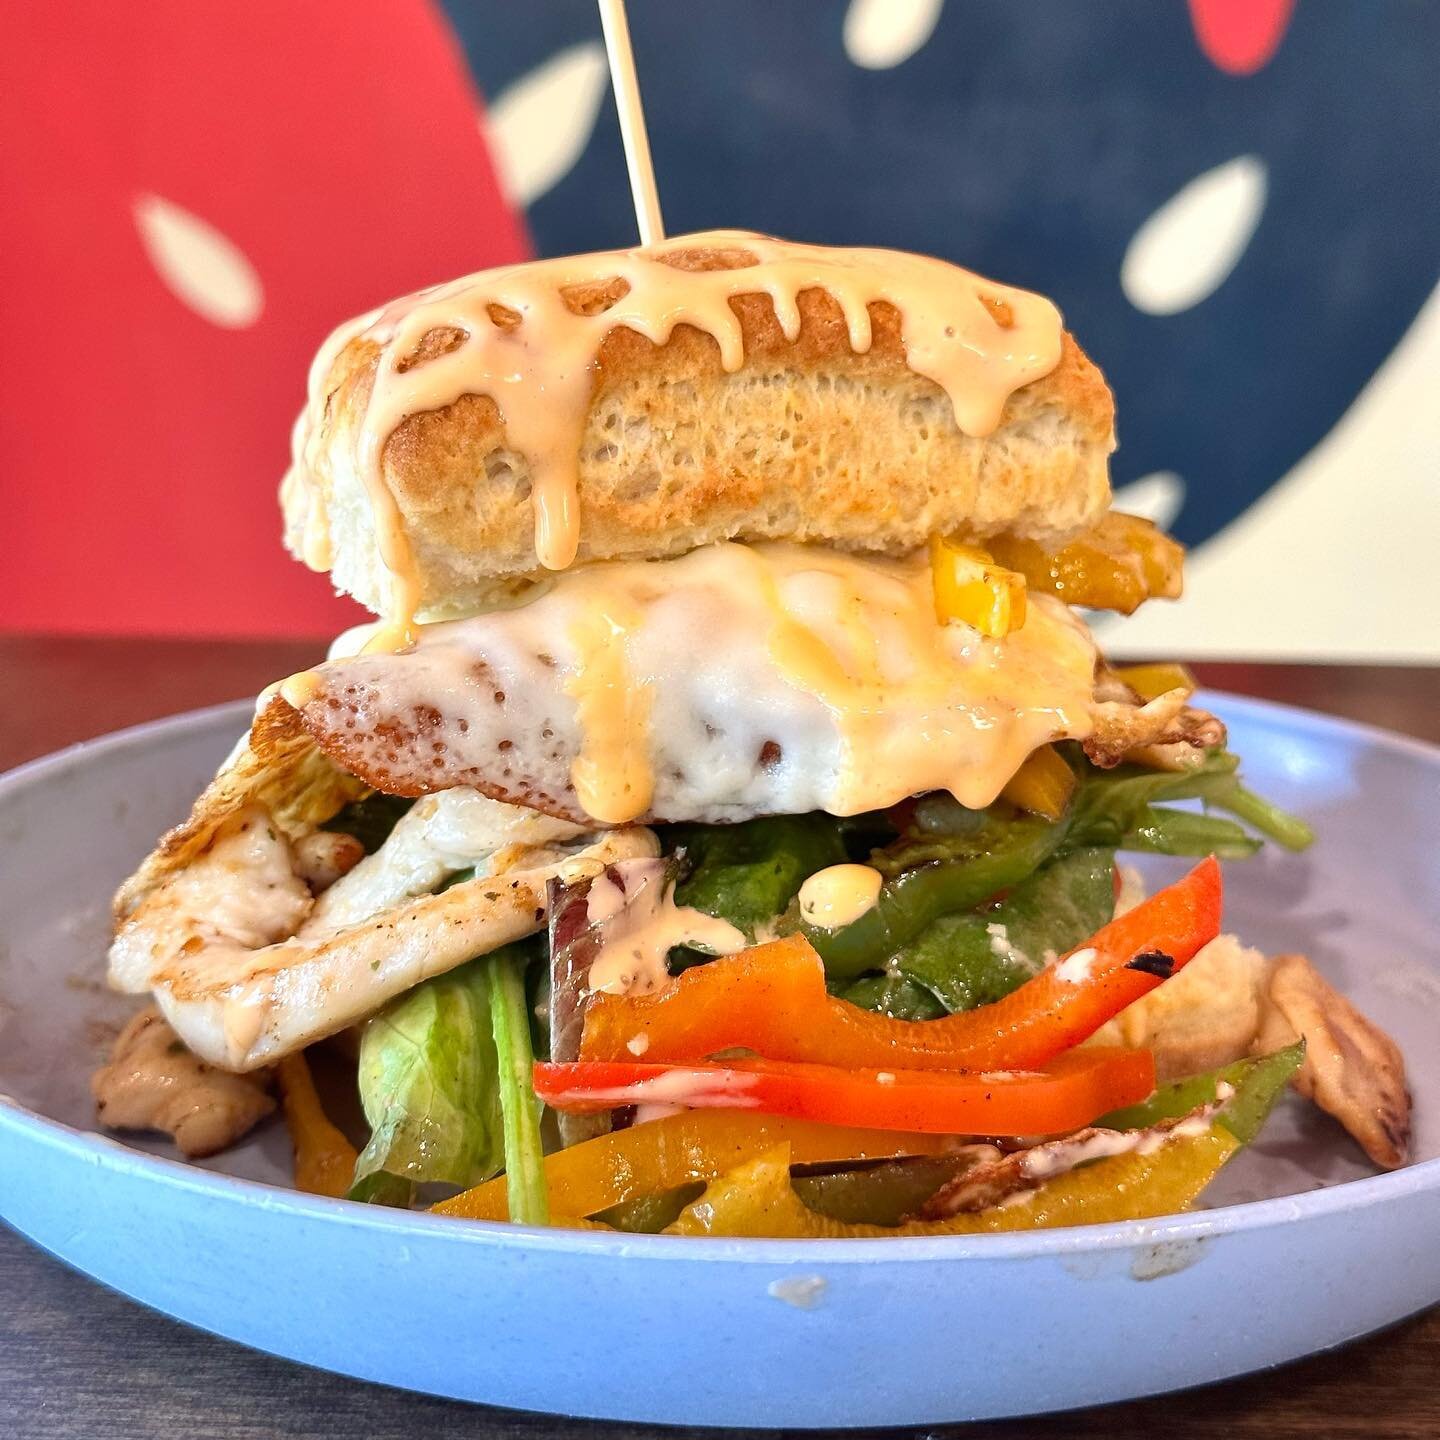 Don&rsquo;t miss our 𝙉𝙖𝙩𝙞𝙤𝙣𝙖𝙡 𝘽𝙞𝙨𝙘𝙪𝙞𝙩 𝙈𝙤𝙣𝙩𝙝 competition going on right now! Submit your best biscuit sandwich creation to us by Wednesday, August 23, and we will pick four winners that you&rsquo;ll see featured in September. Find 